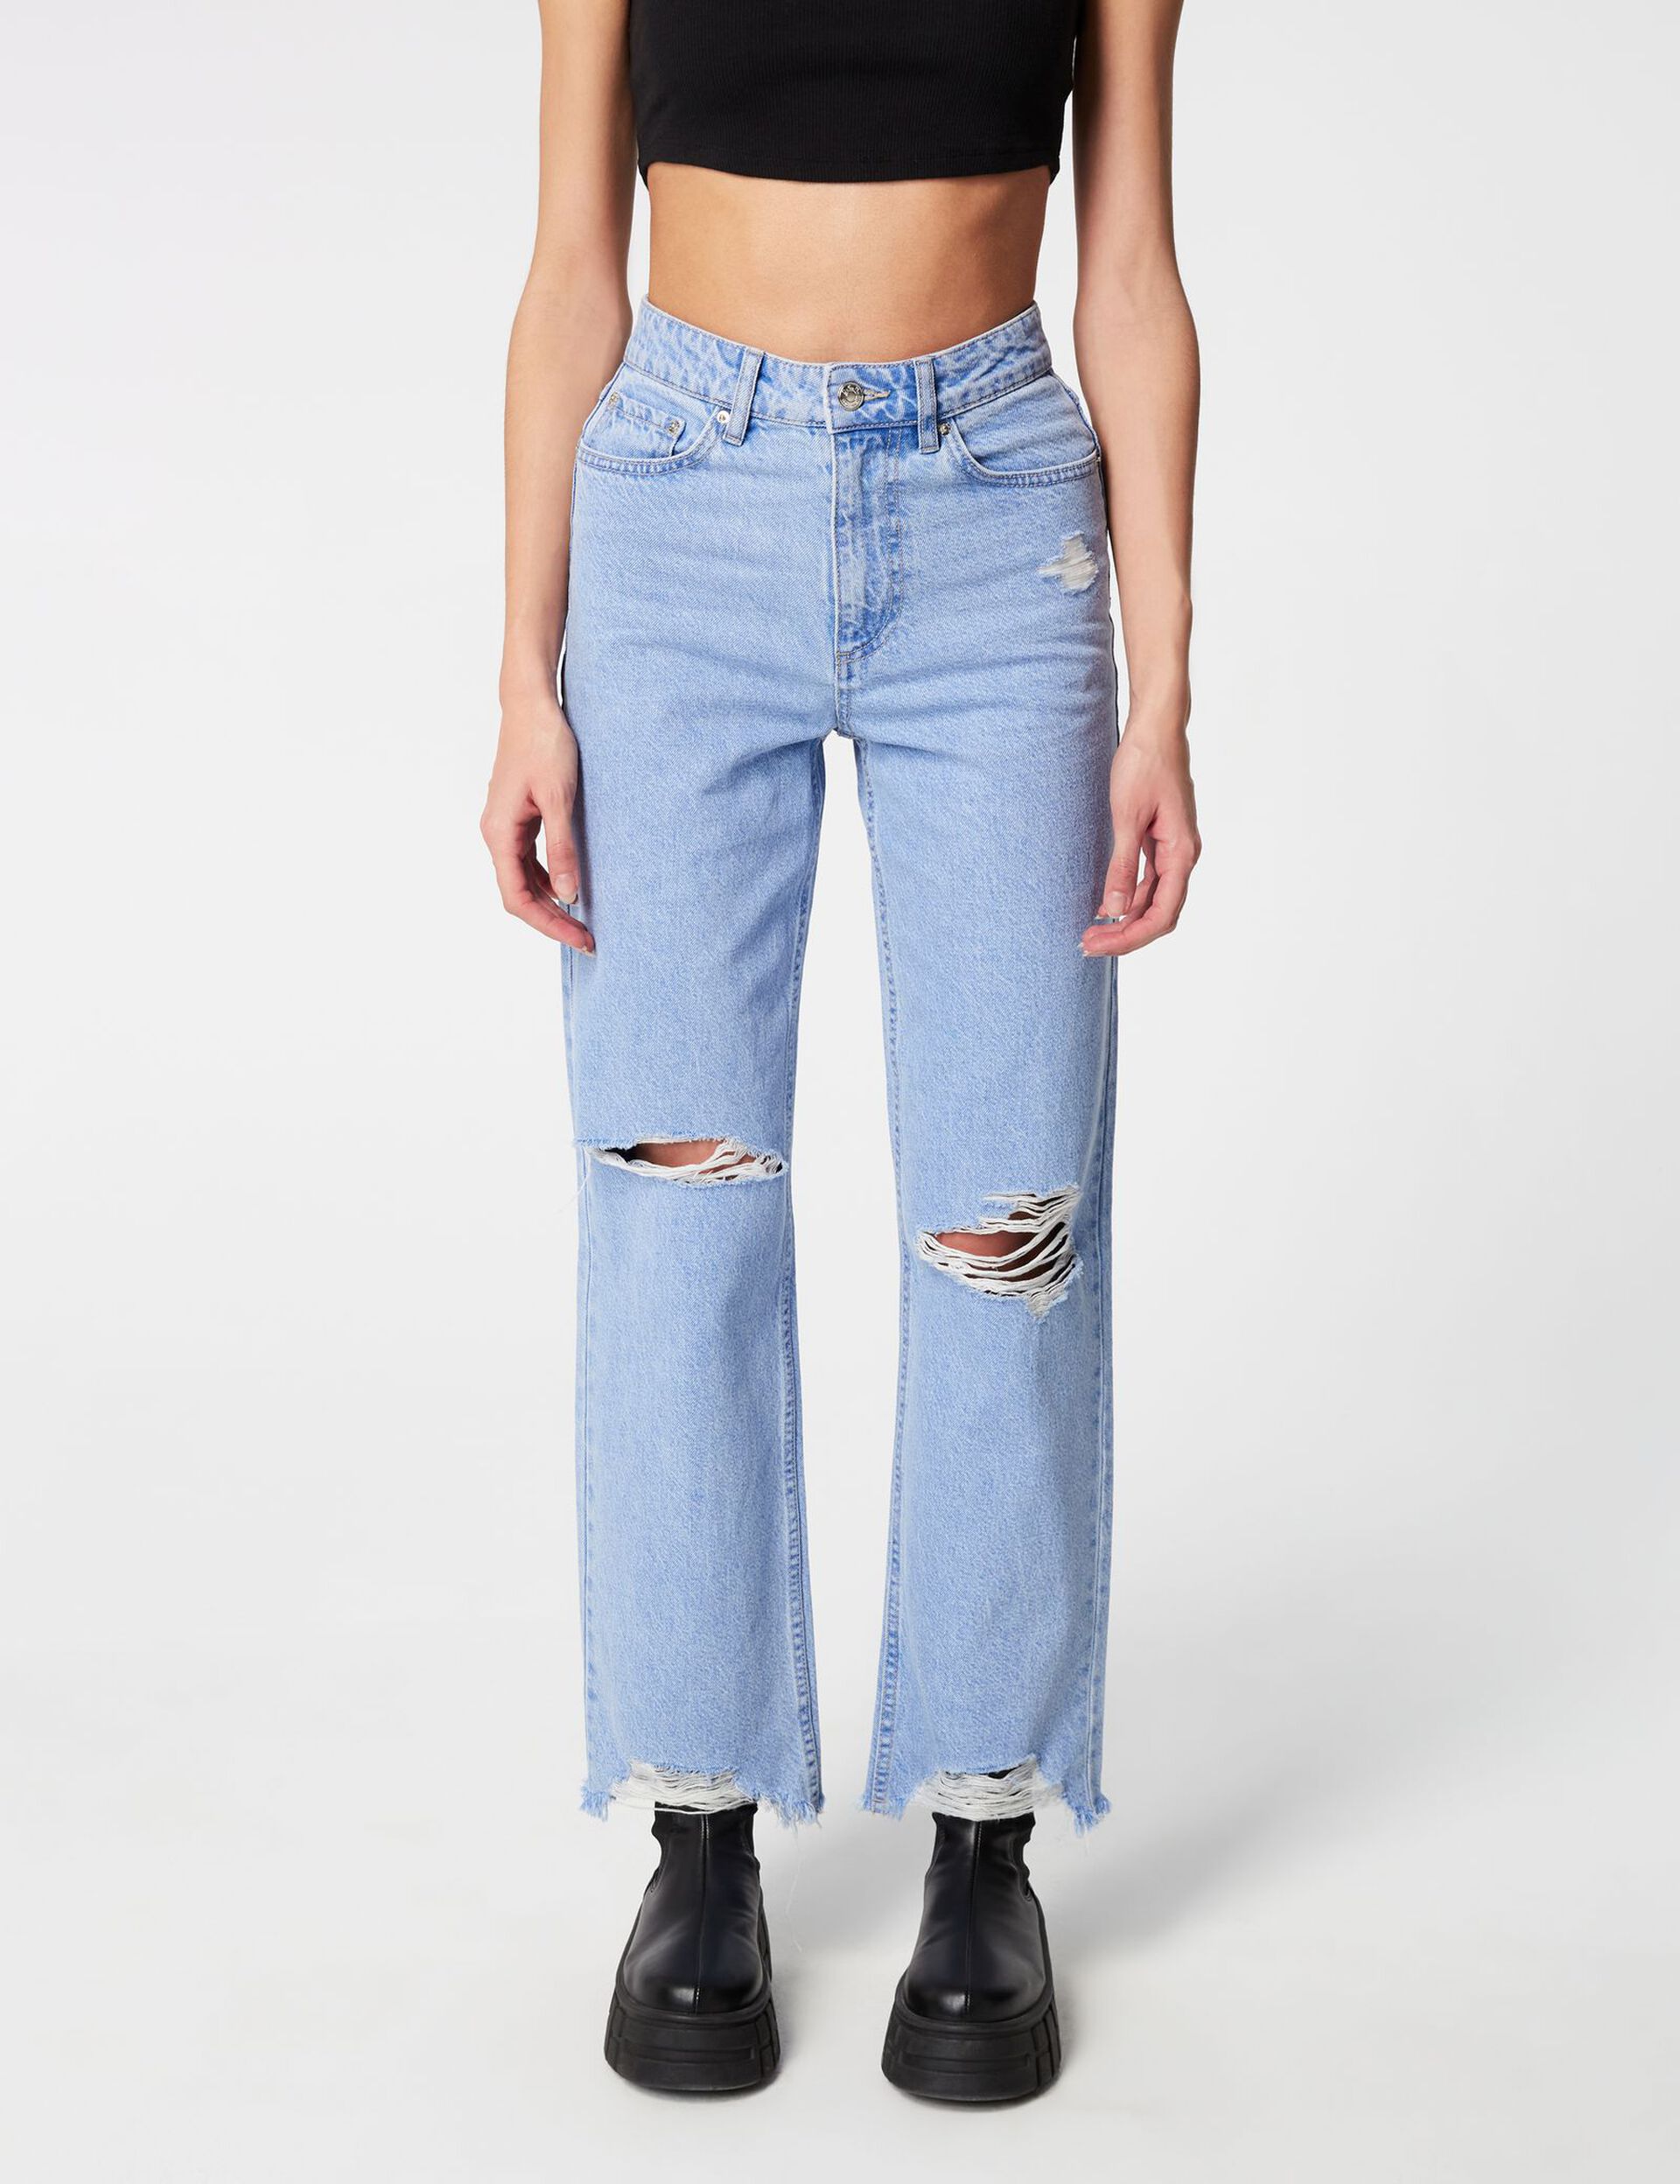 High-waisted distressed jeans